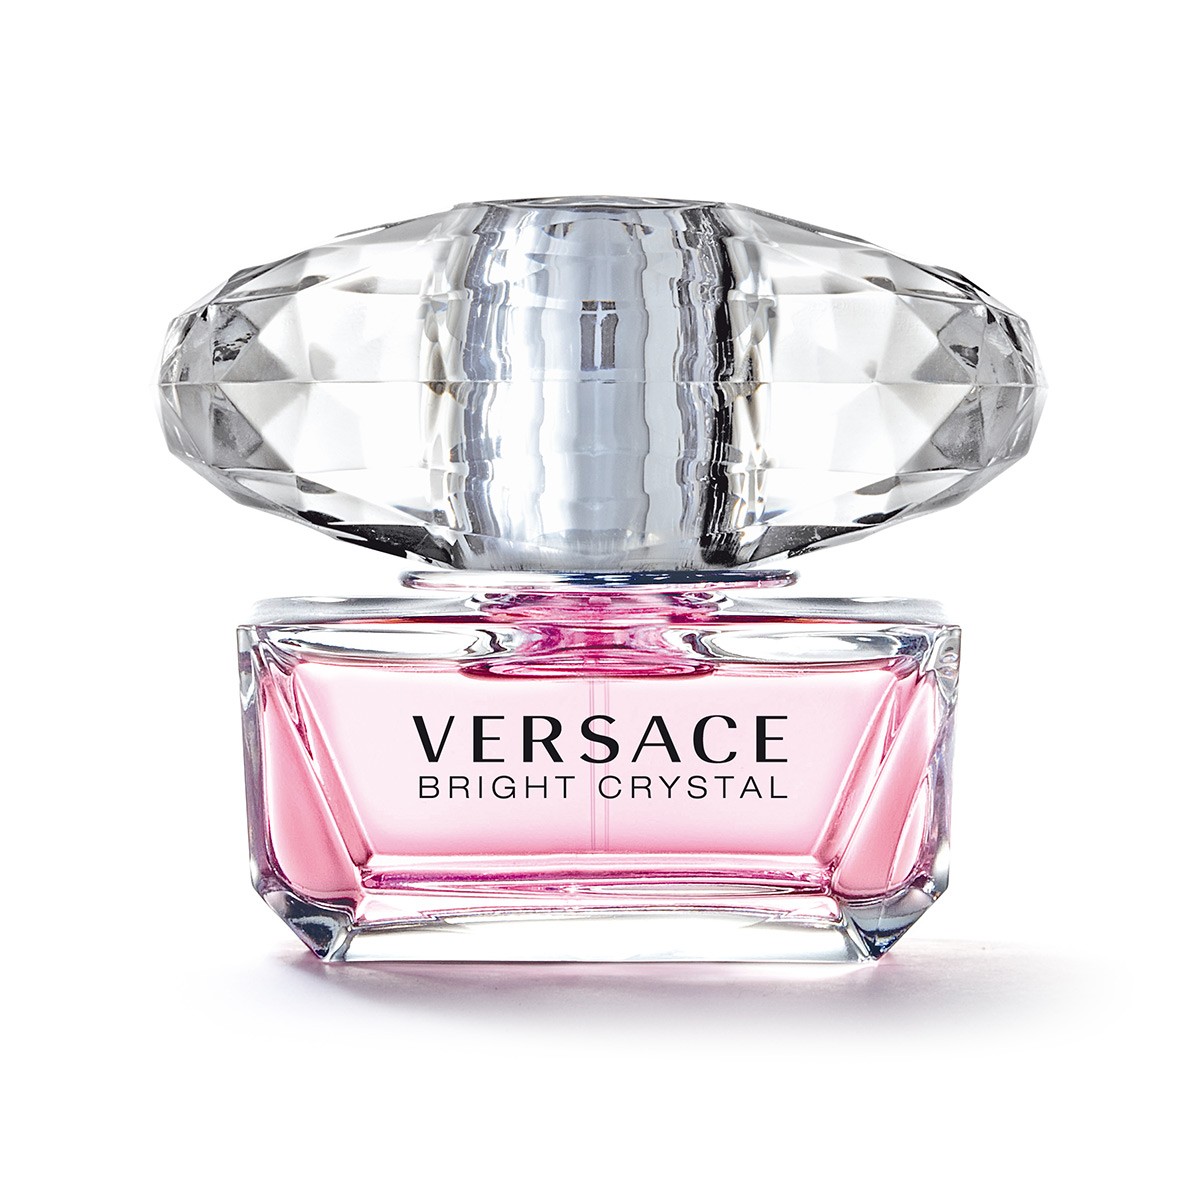 VERSACE BRIGHT CRYSTAL EDT 50 ML image